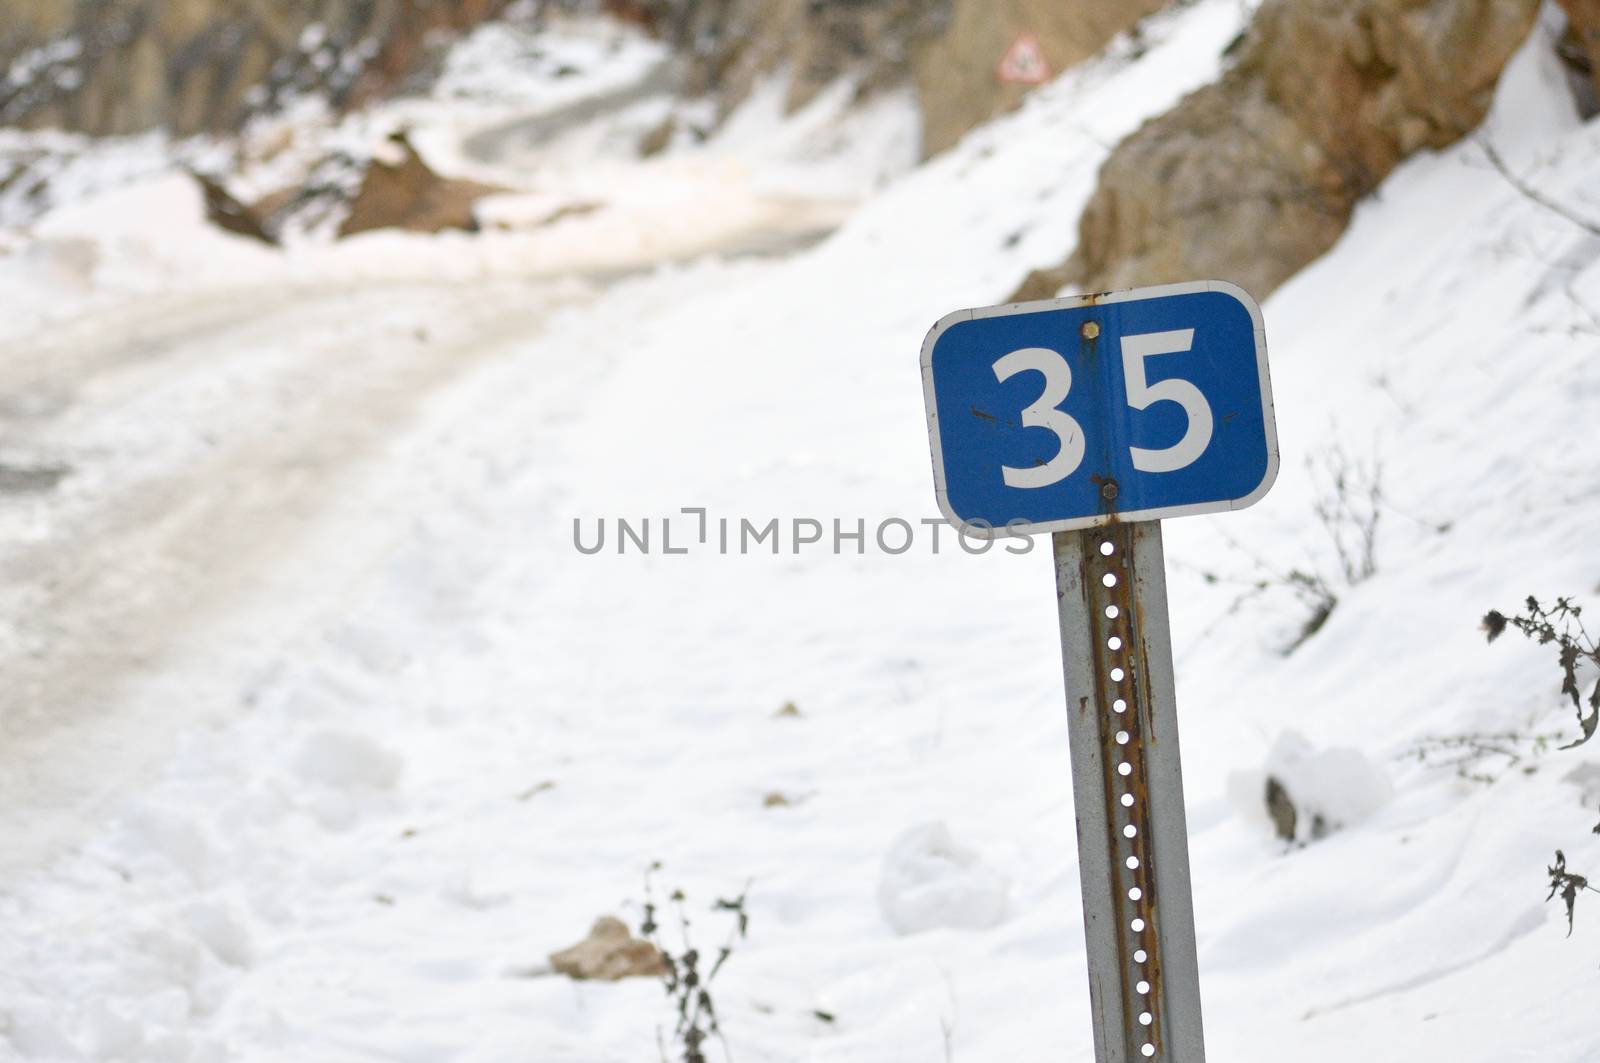 Road signs. The roads in the snow-capped mountains. by moviephoto